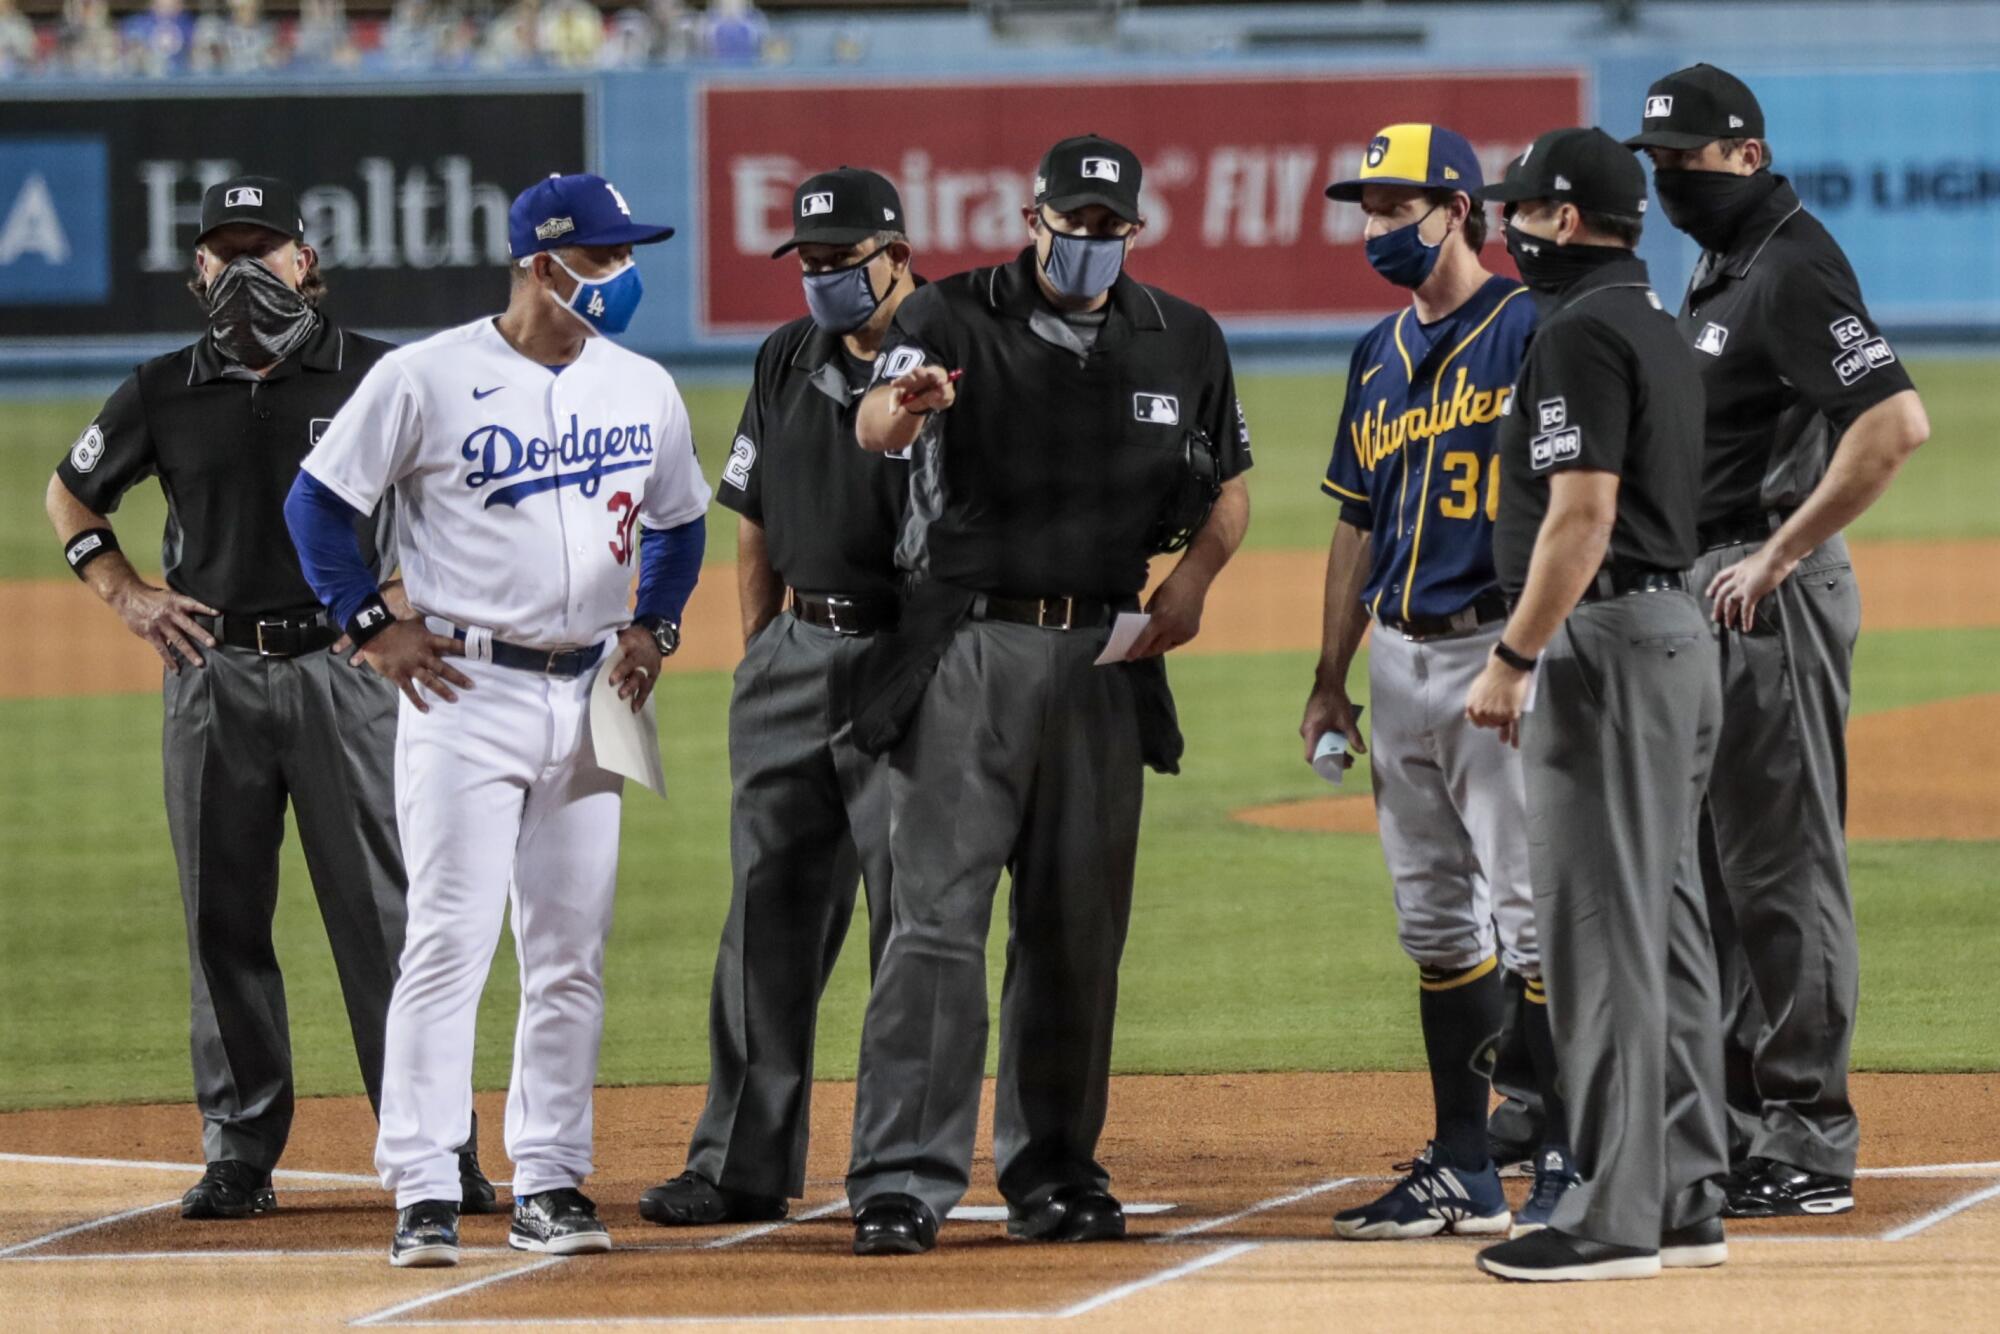 Dodgers manager Dave Roberts and Milwaukee Brewers manager Craig Counsell go over the ground rules.